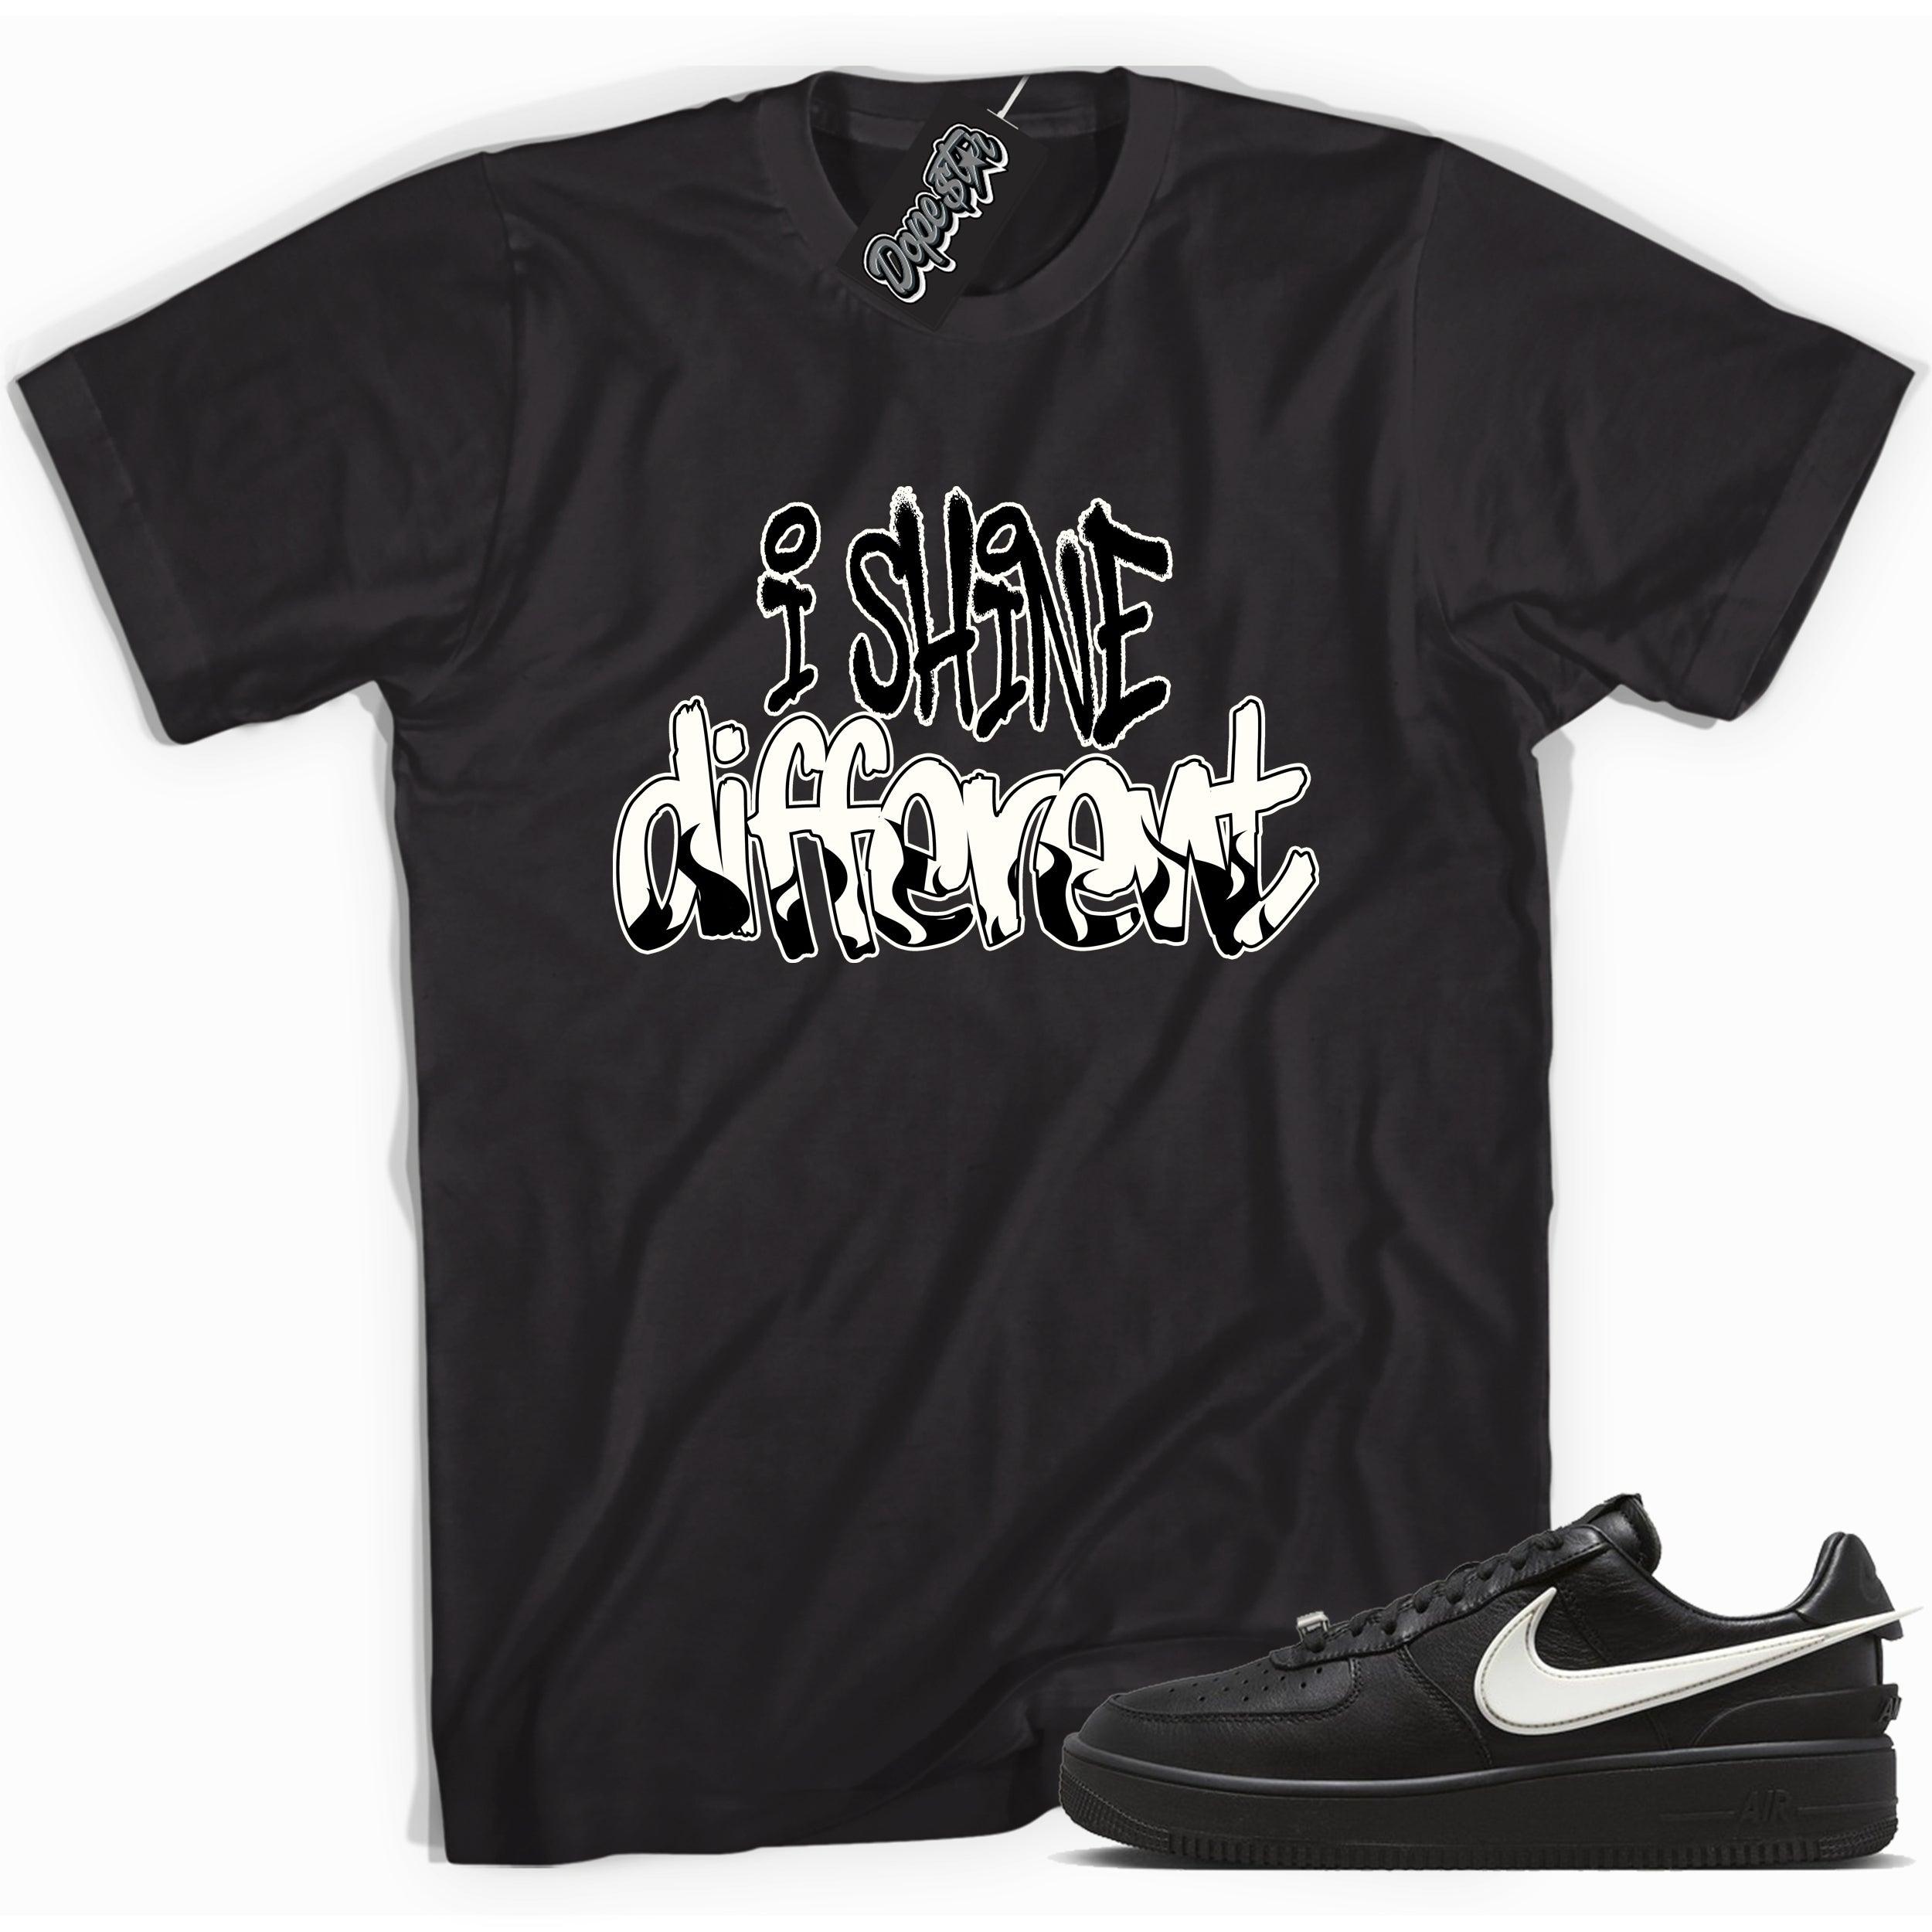 Cool black graphic tee with 'i shine different' print, that perfectly matches Nike Air Force 1 Low SP Ambush Phantom sneakers.